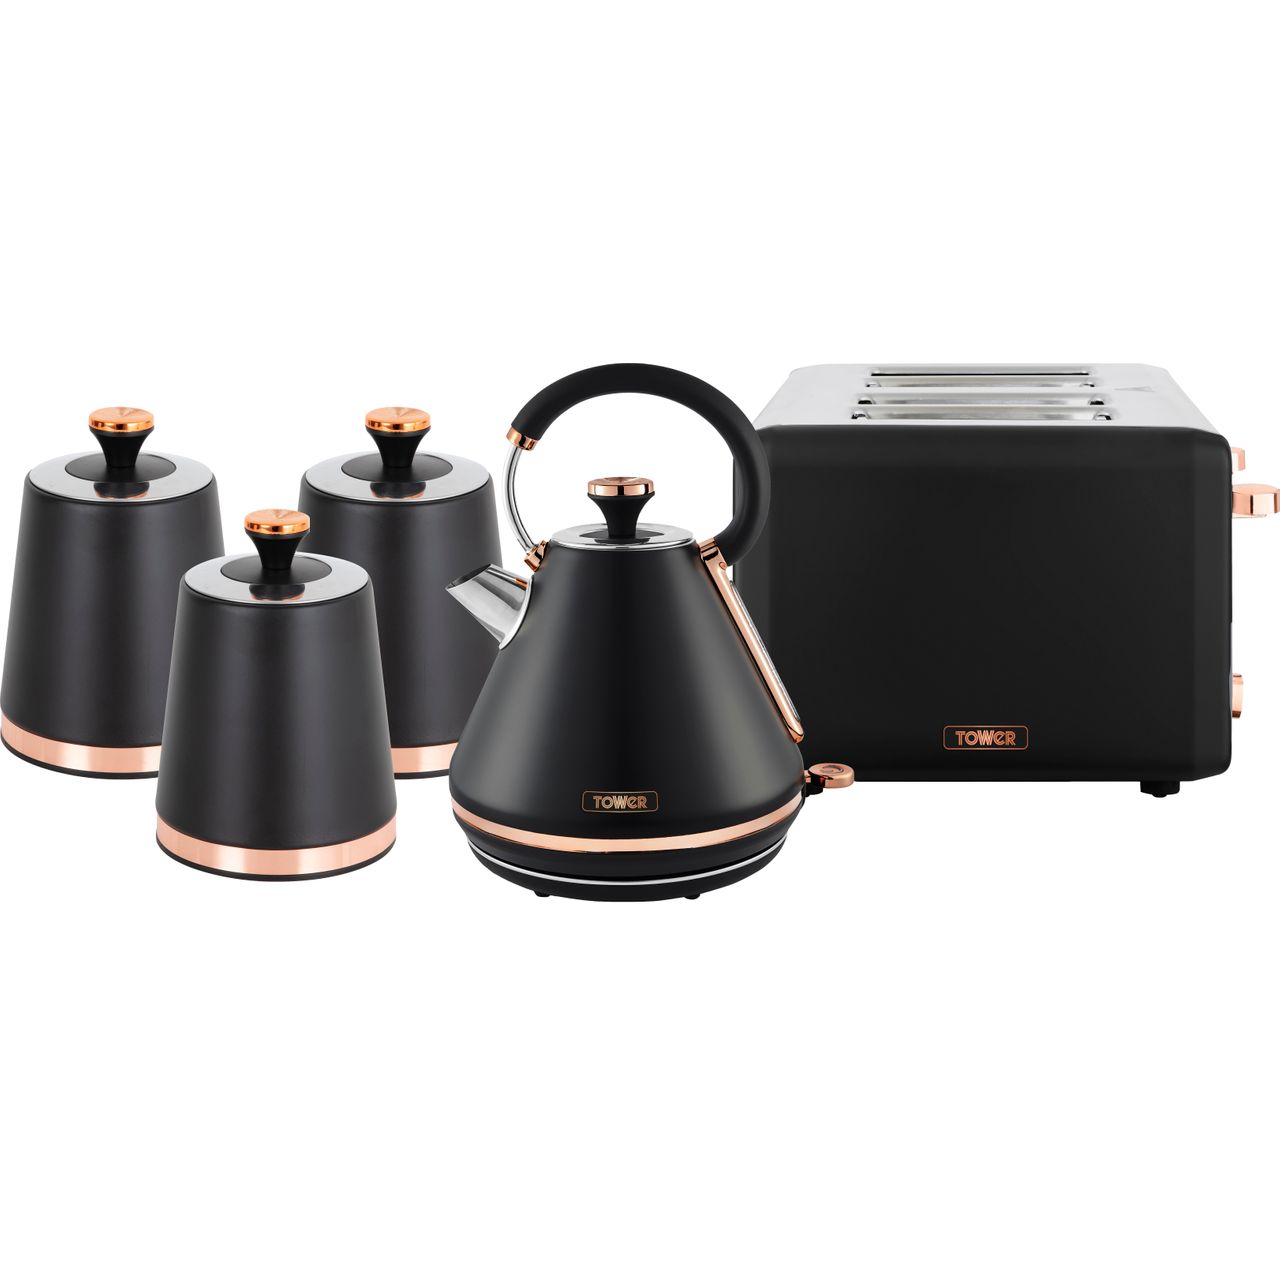 Tower Cavaletto AOBUNDLE020 Kettle And Toaster Sets Review